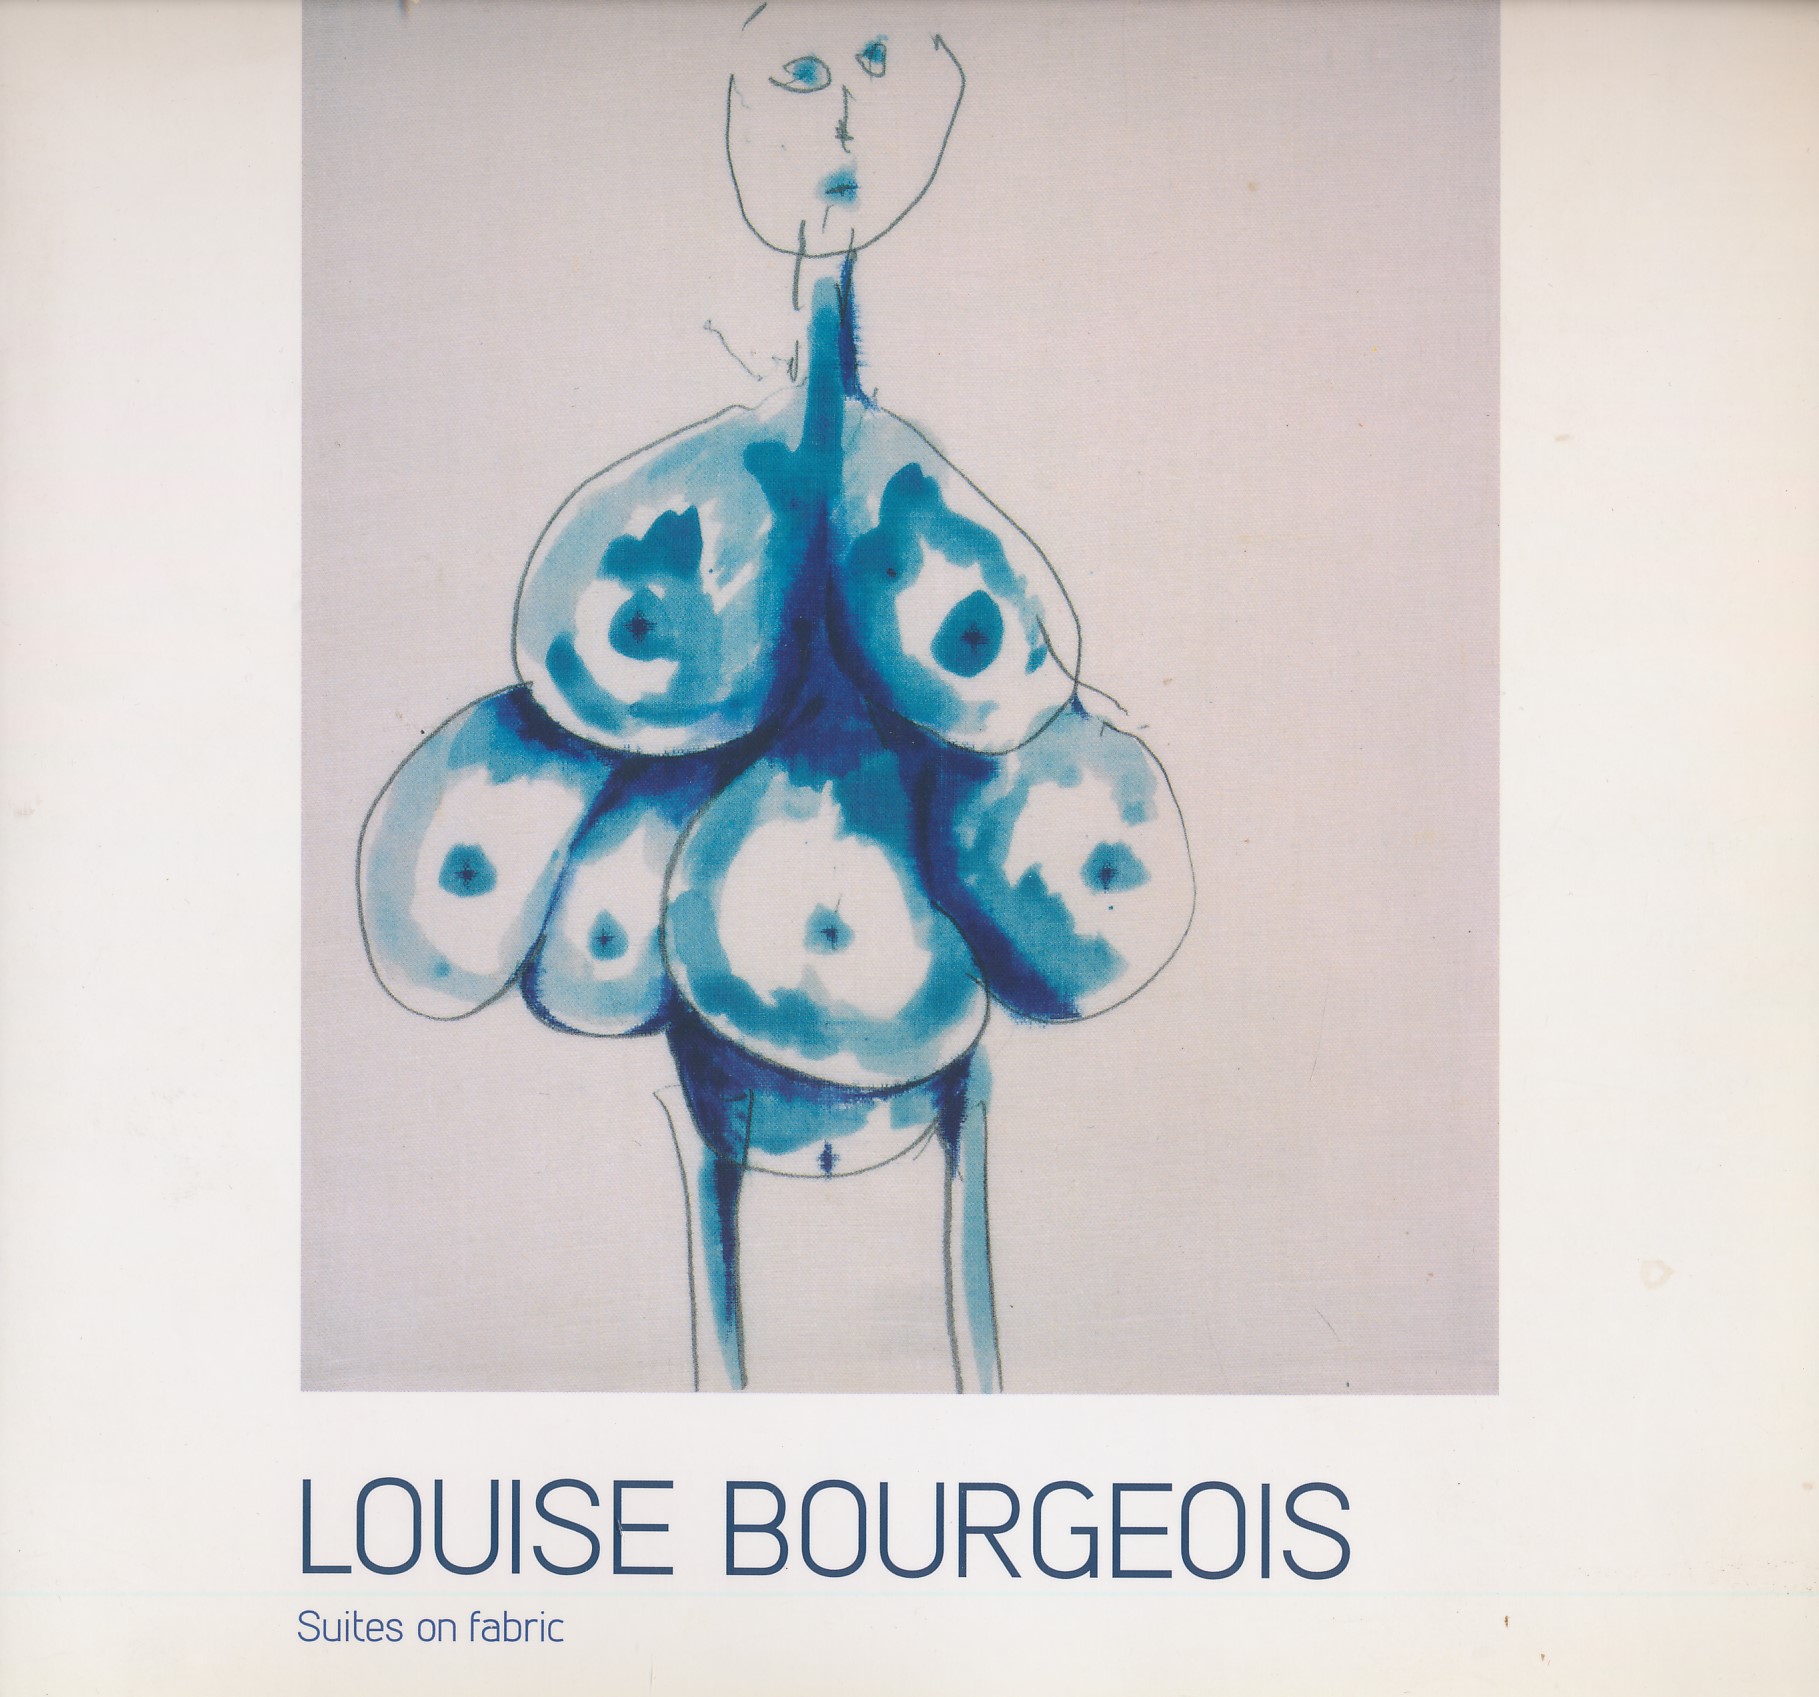 Louise Bourgeois. Suites on Fabric. 8 June - 2 July 2011